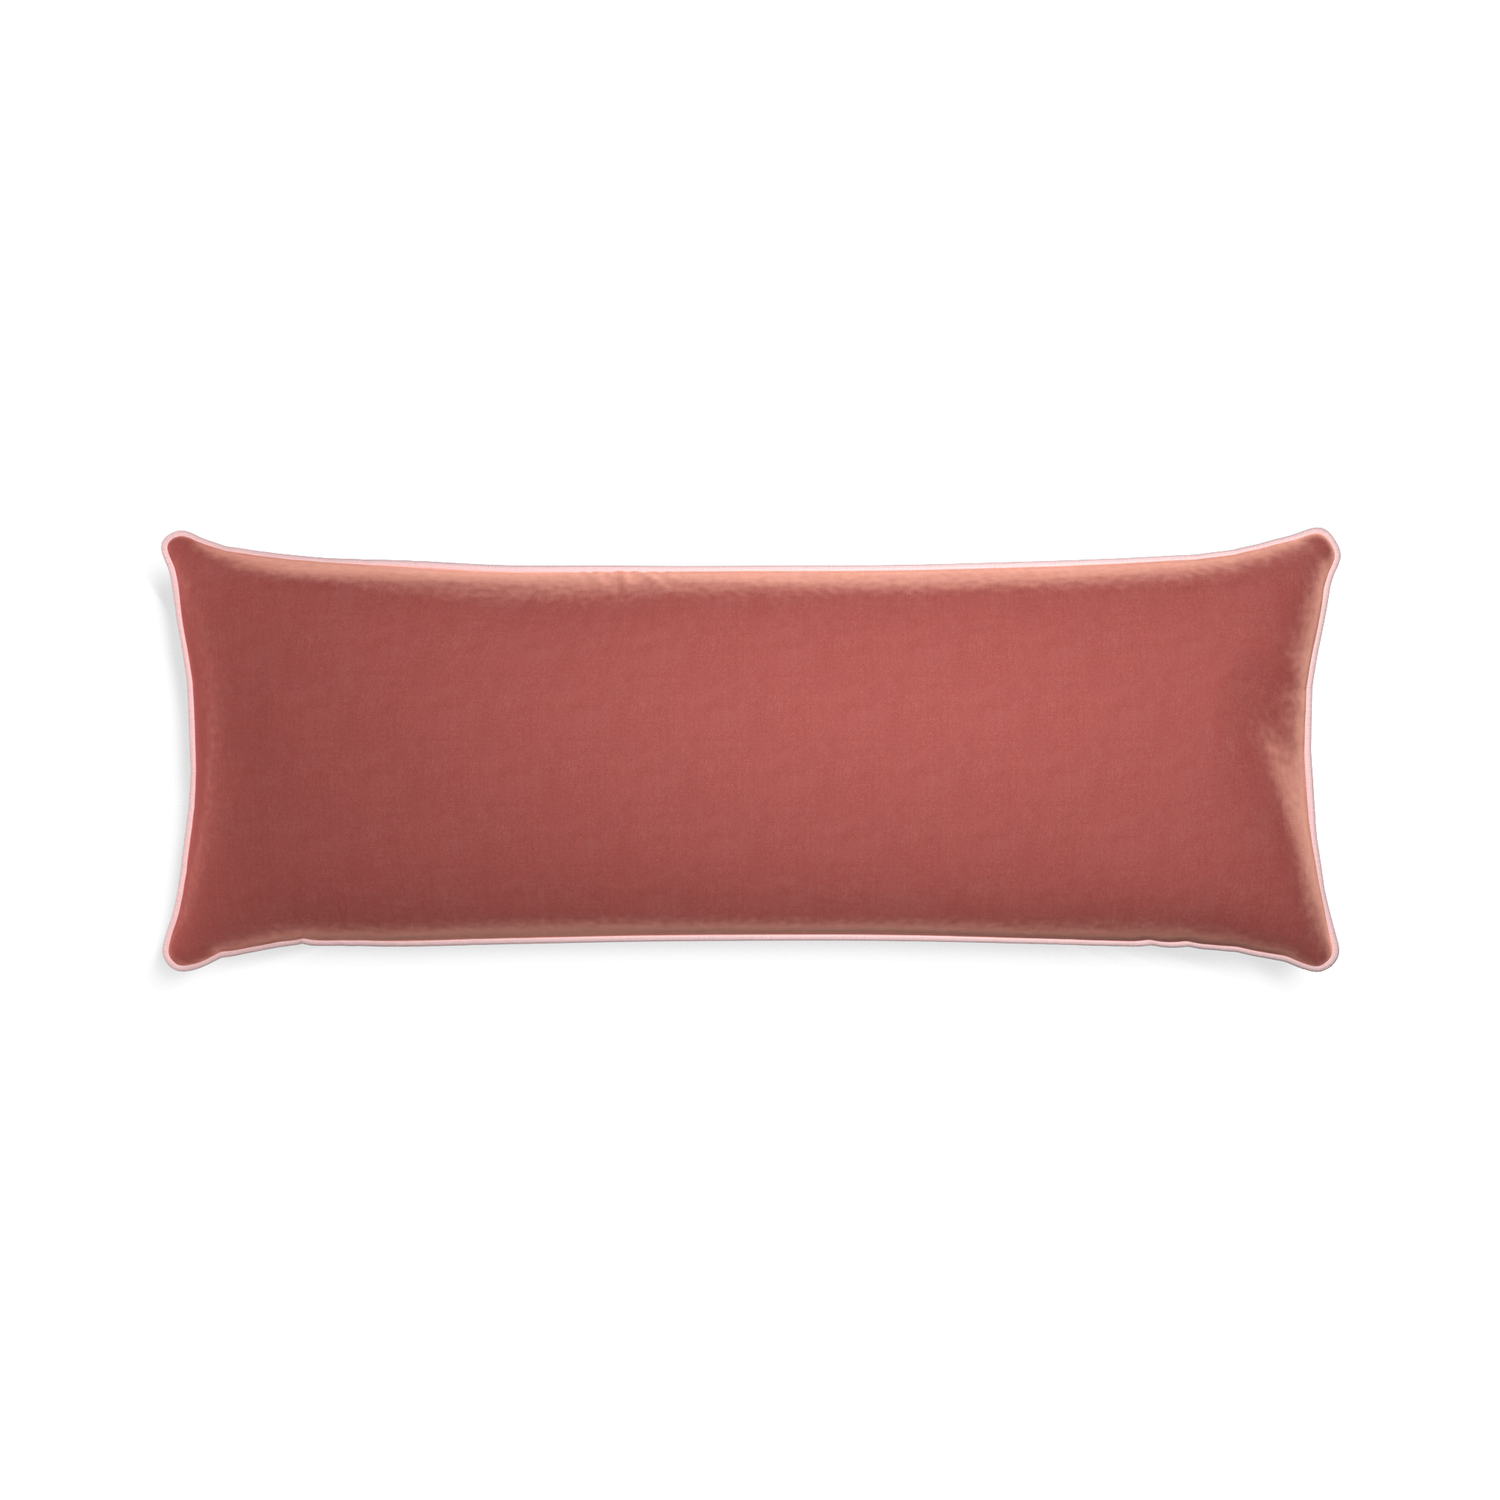 Xl-lumbar cosmo velvet custom pillow with petal piping on white background